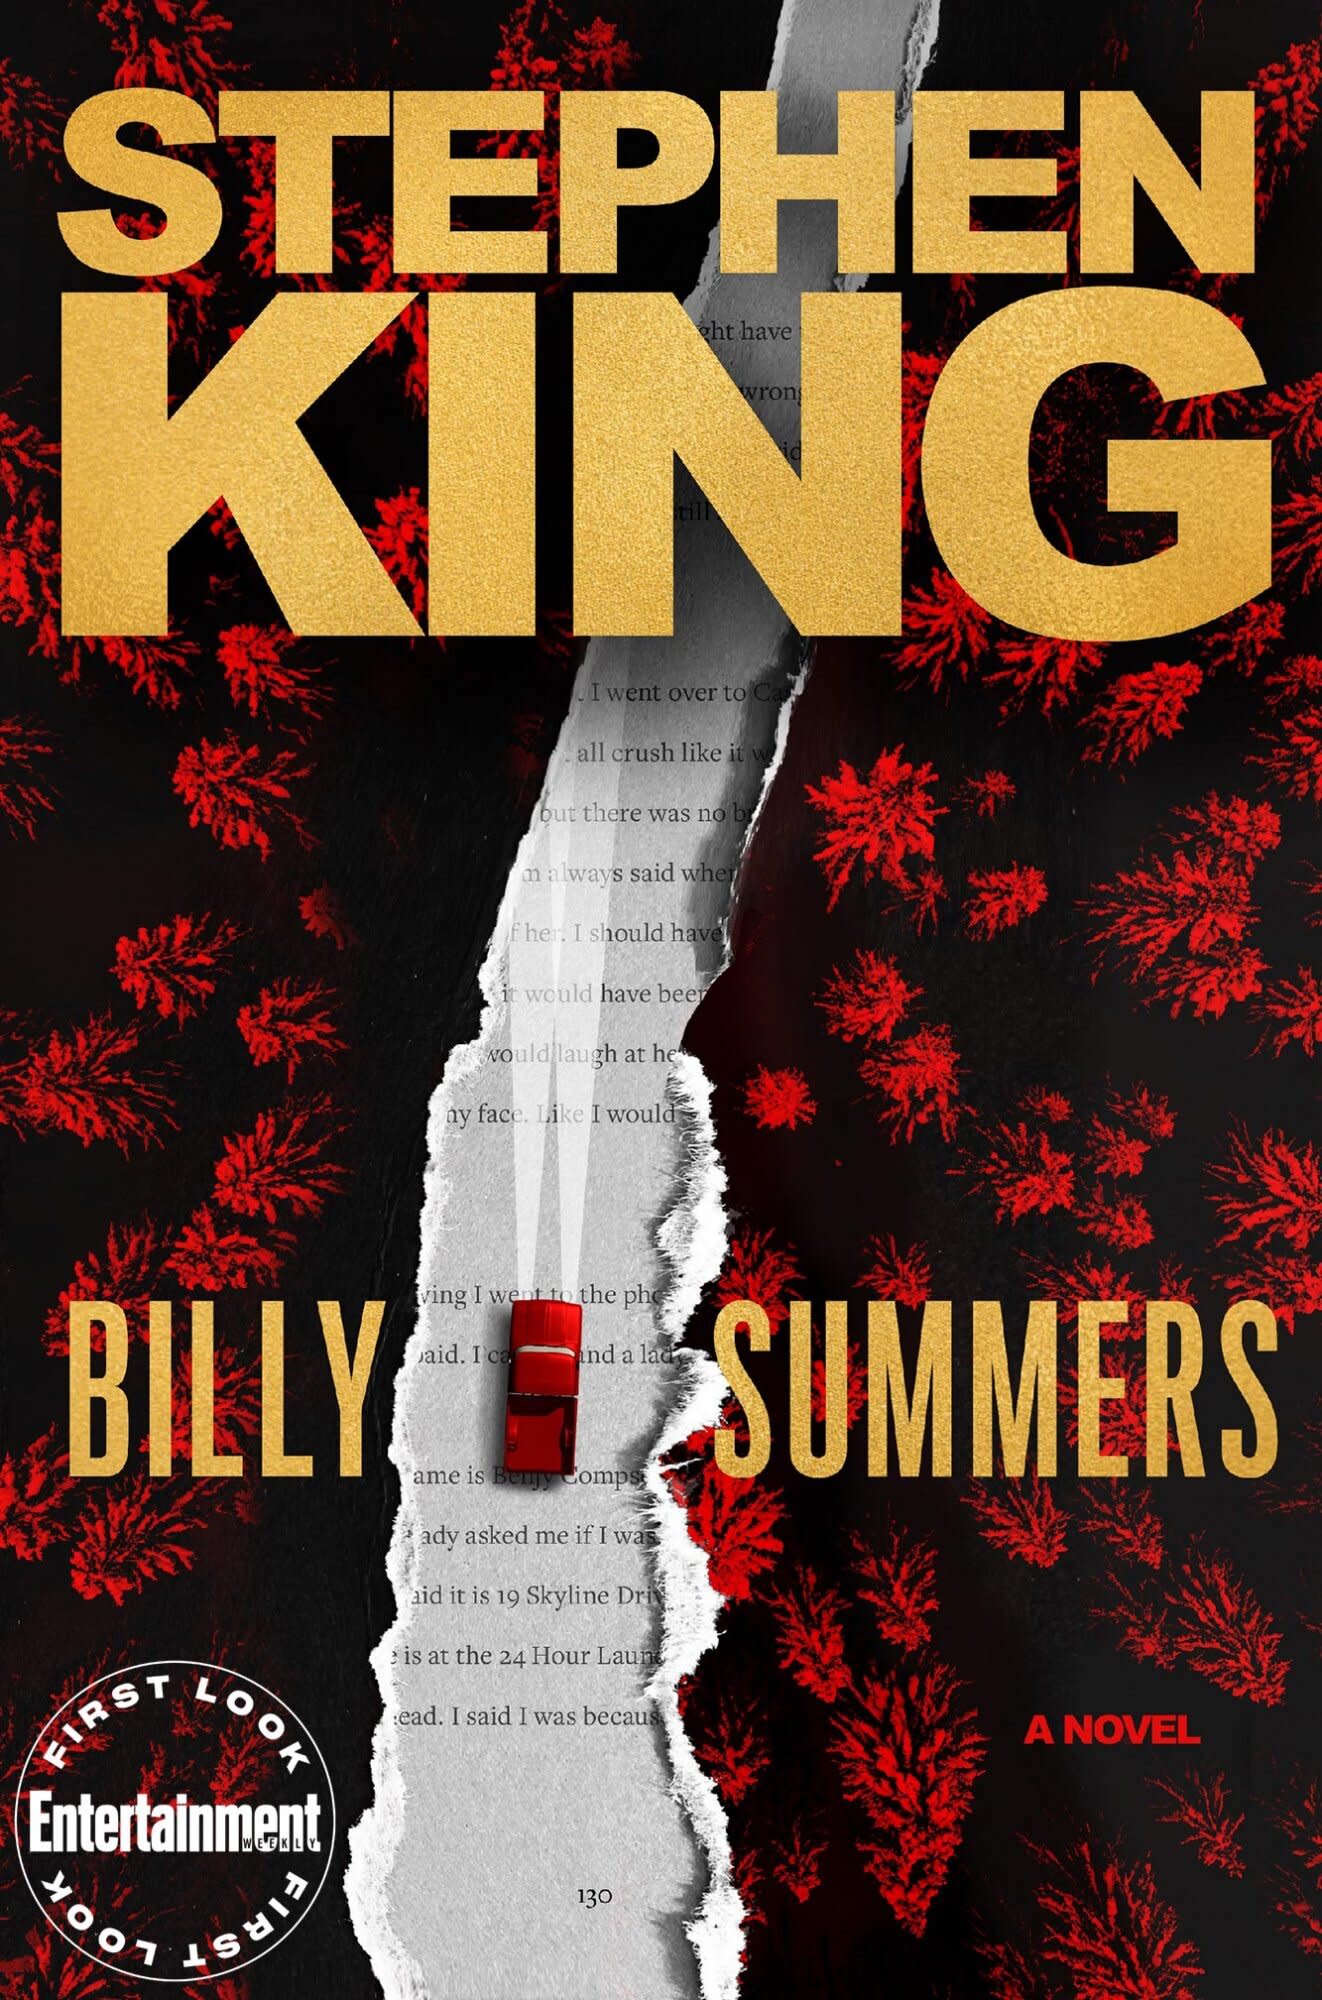 Read a killer excerpt from Stephen King's new novel Billy Summers